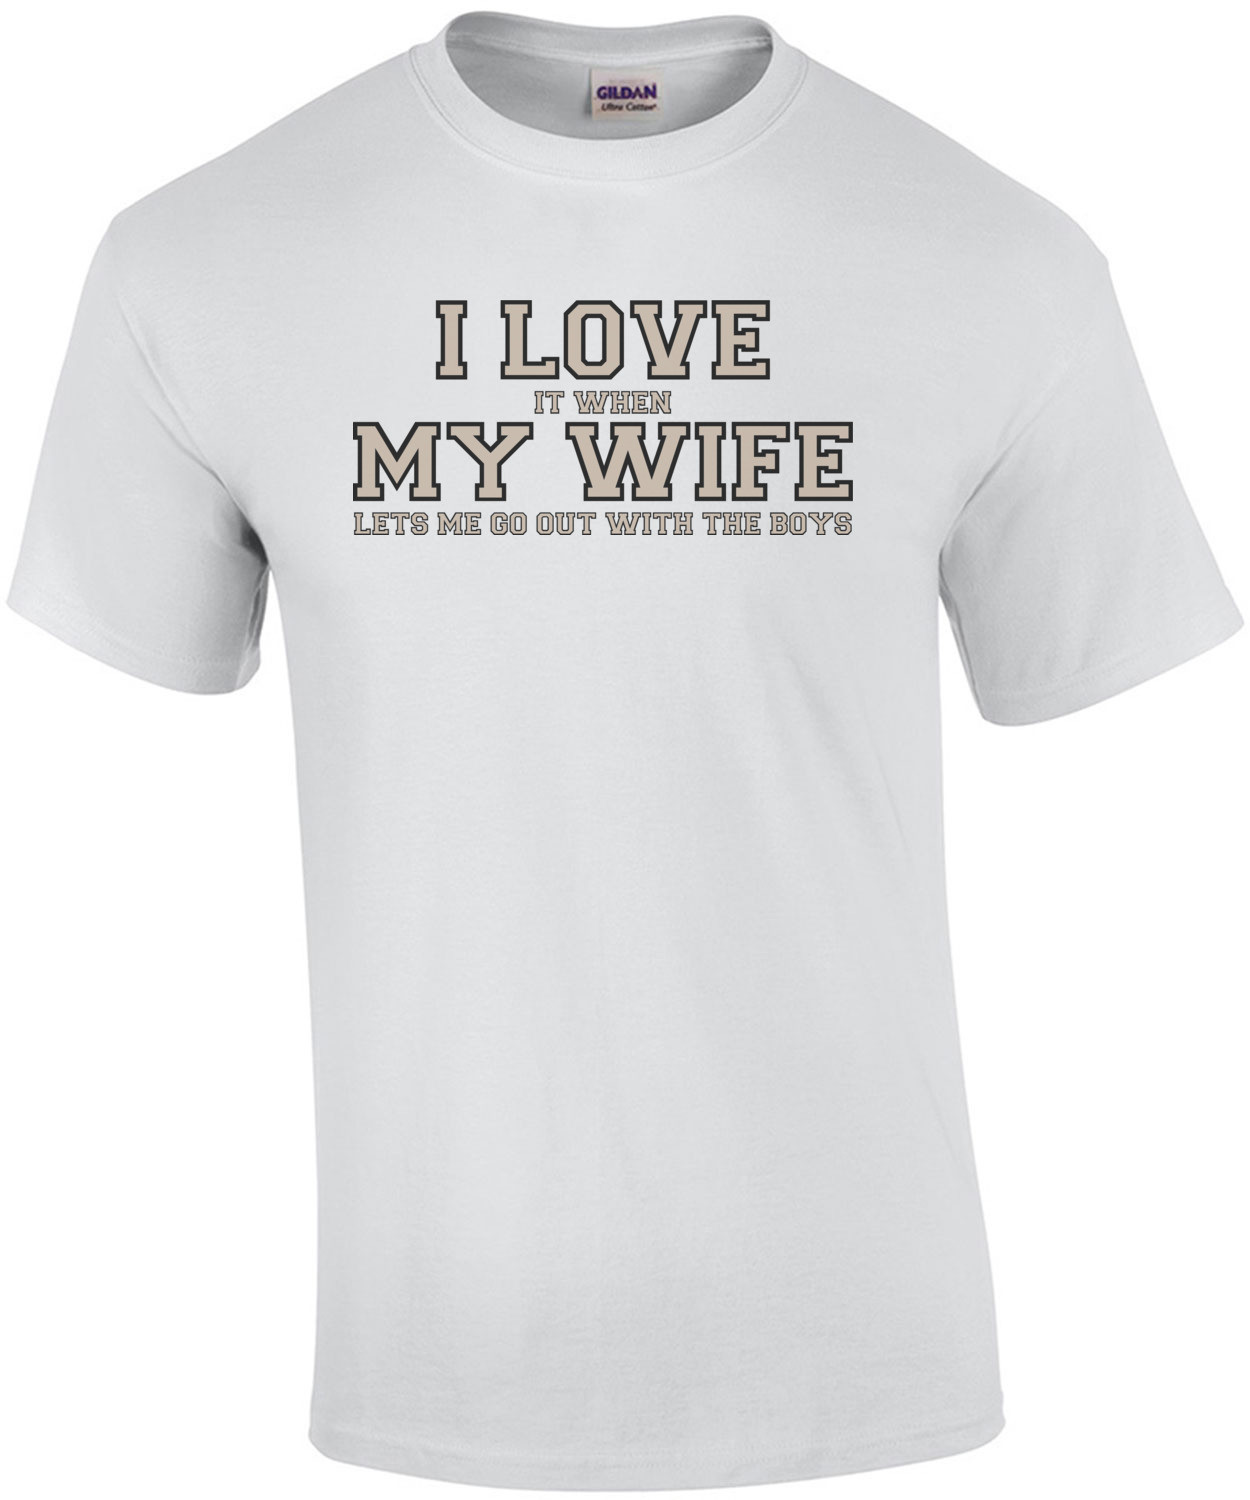 I love it when my wife lets me go out with the boys - Funny T-Shirt